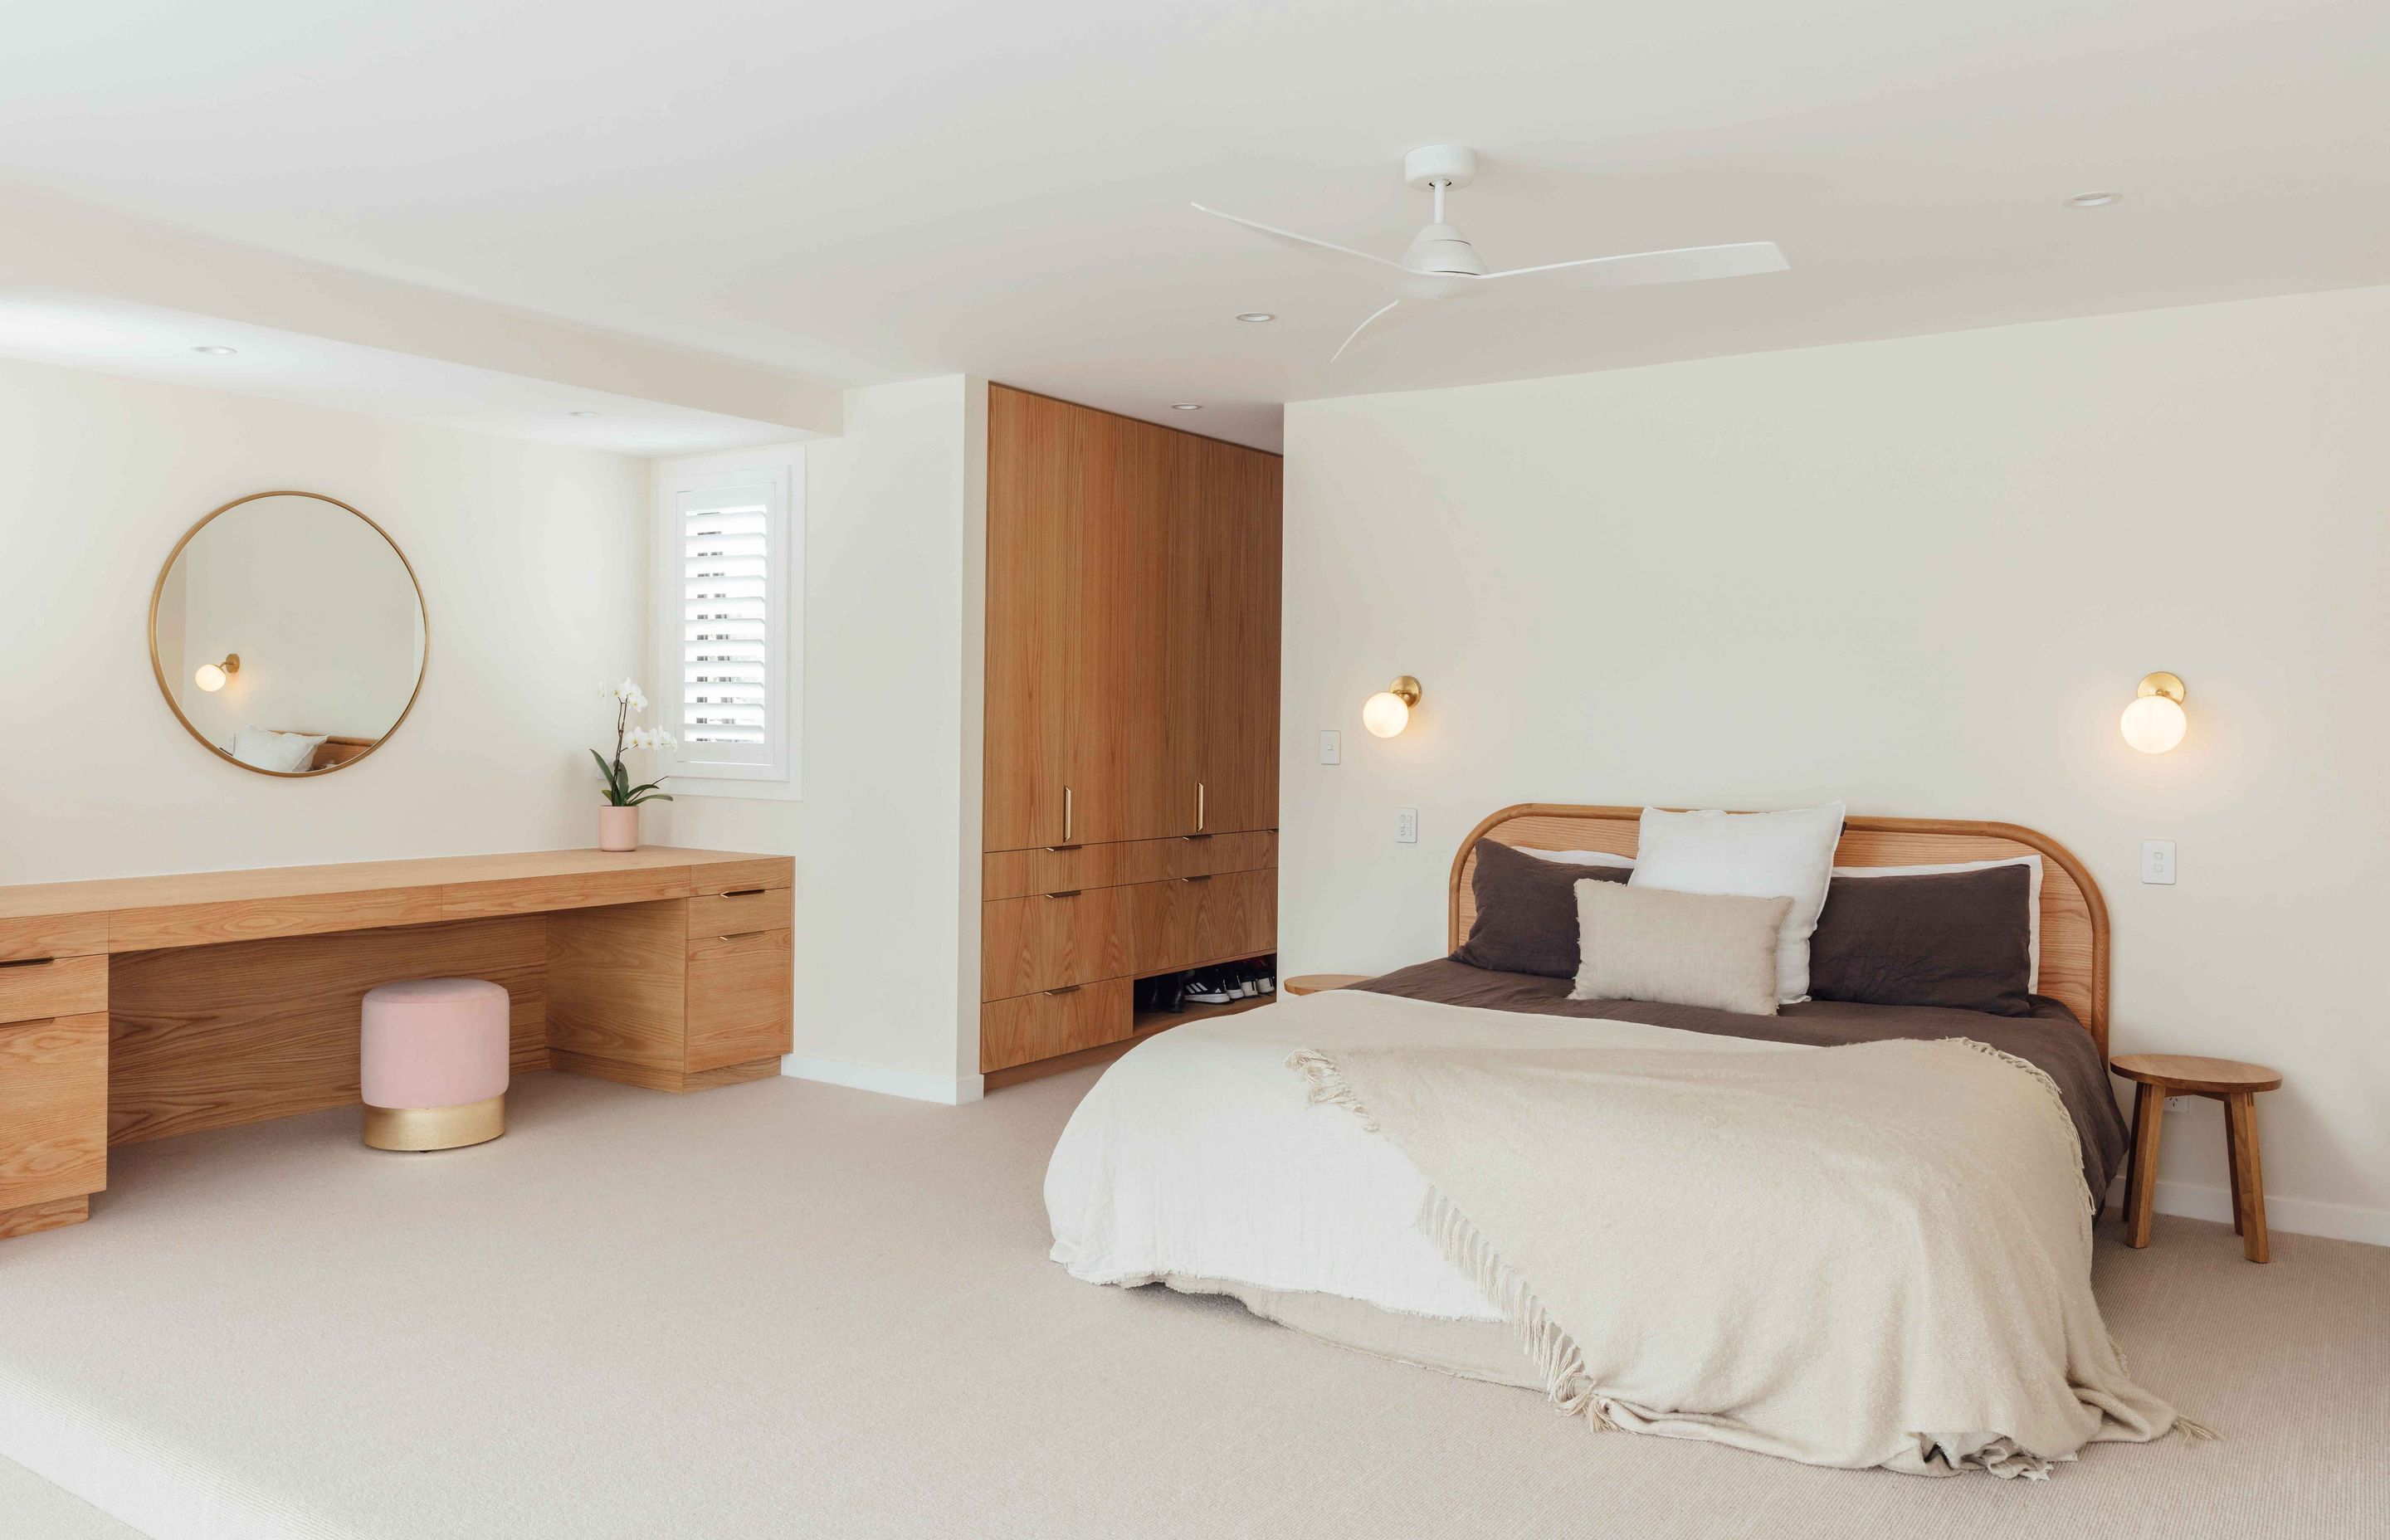 The main bedroom is a study in refined elegance with a muted colour palette teamed with timber and brass accents.